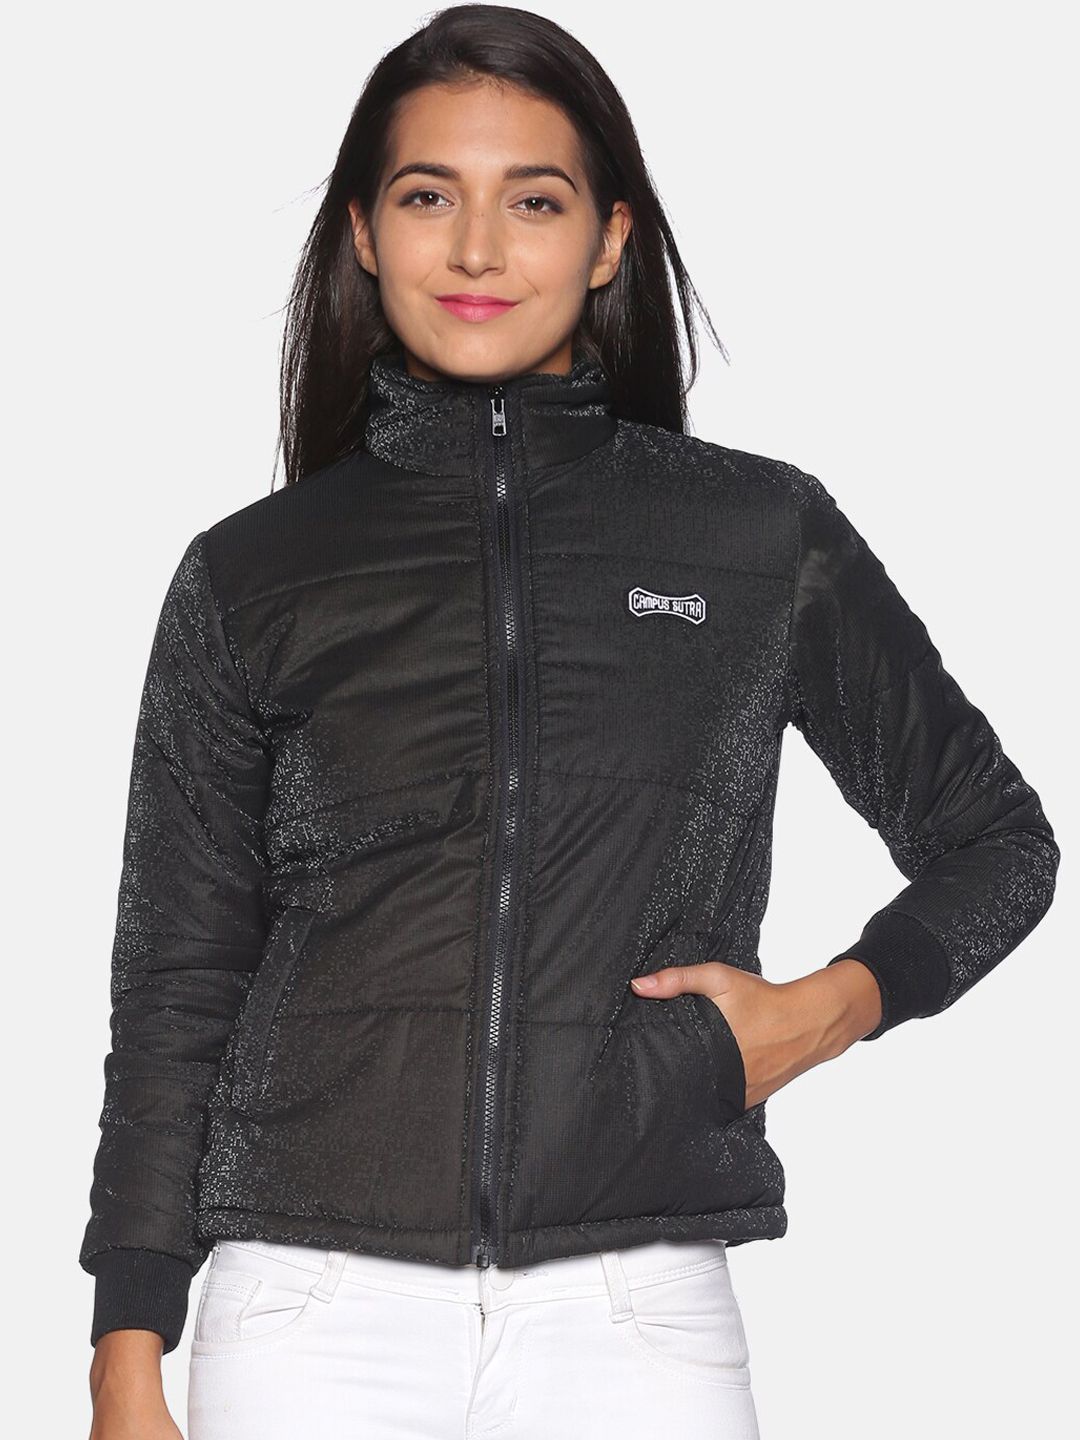 Campus Sutra Women Black Windcheater Padded Jacket Price in India